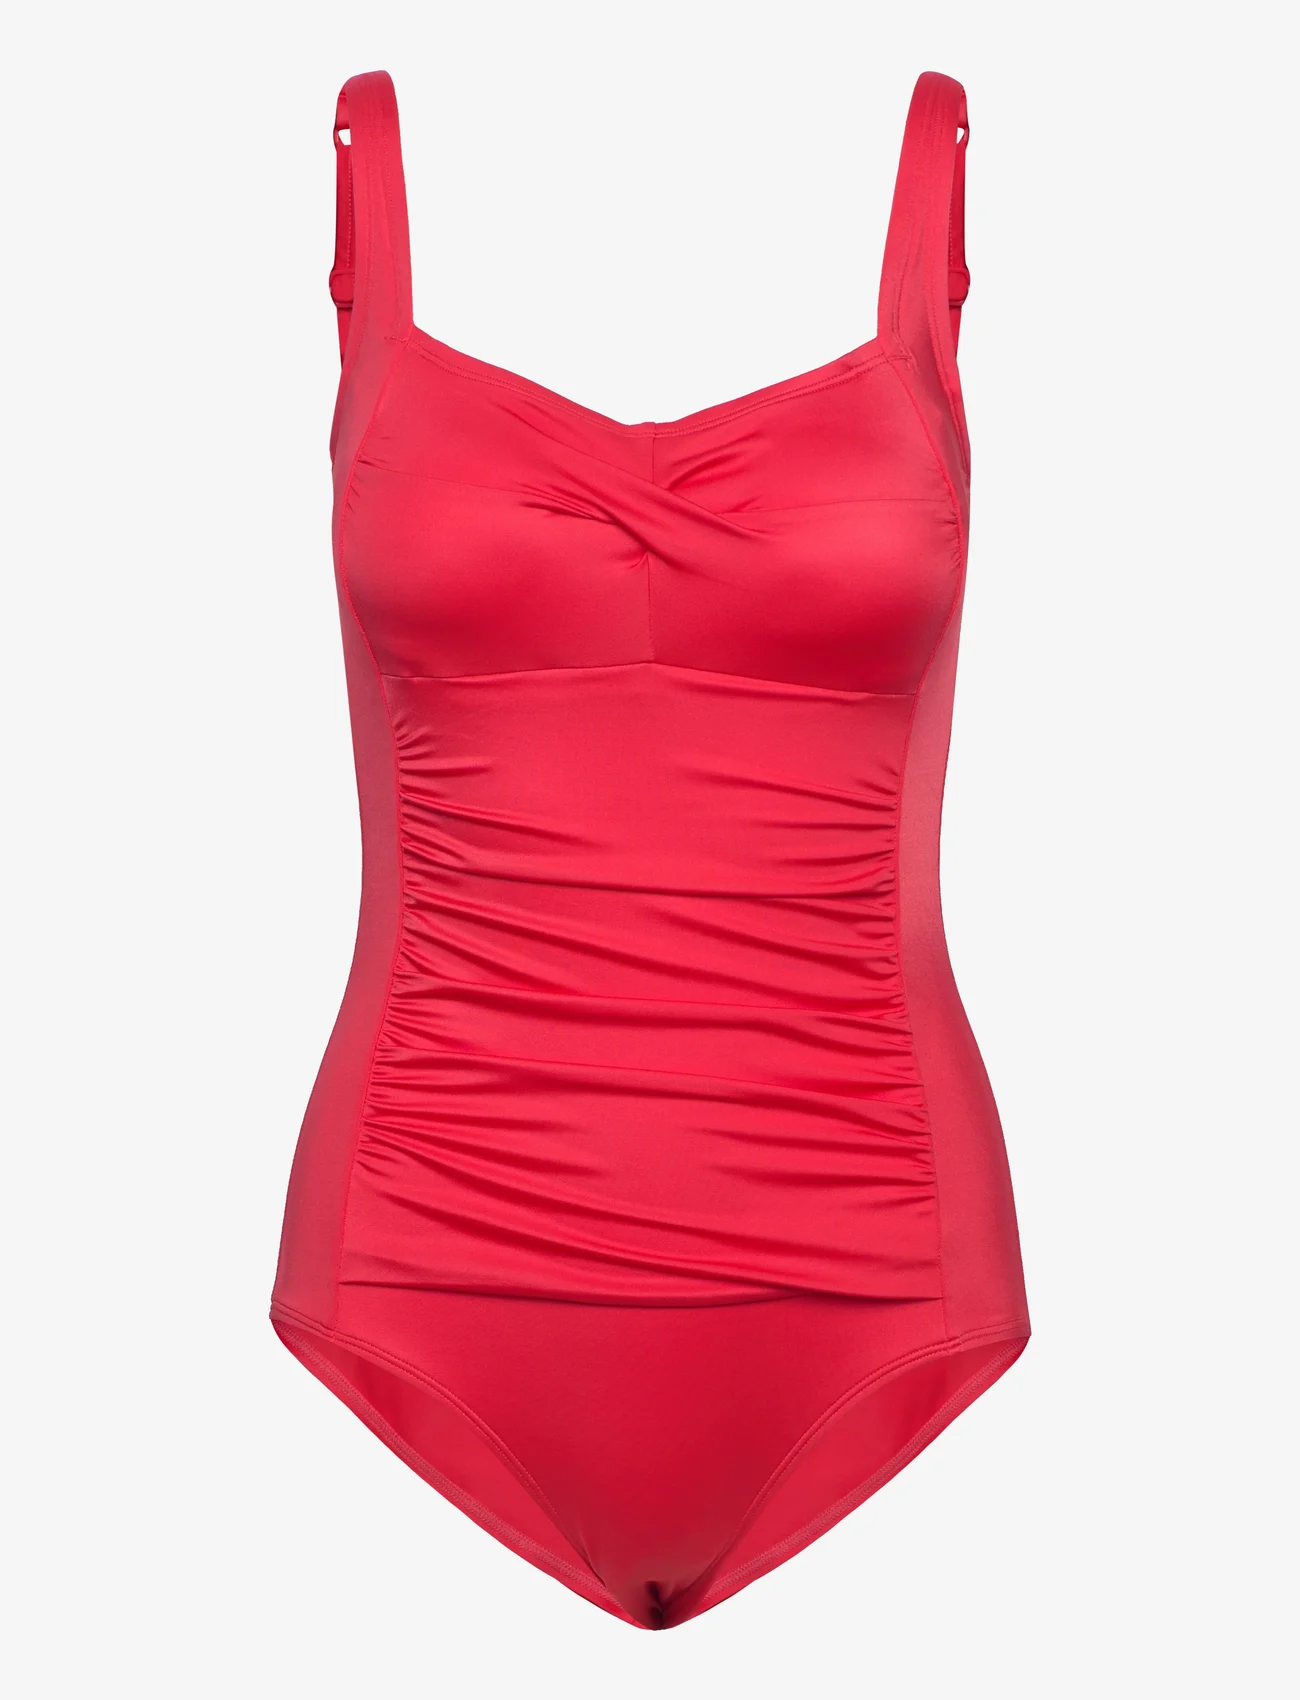 Dorina - FIJI/ECO SHAPING_SWIMSUIT - lowest prices - red - 0